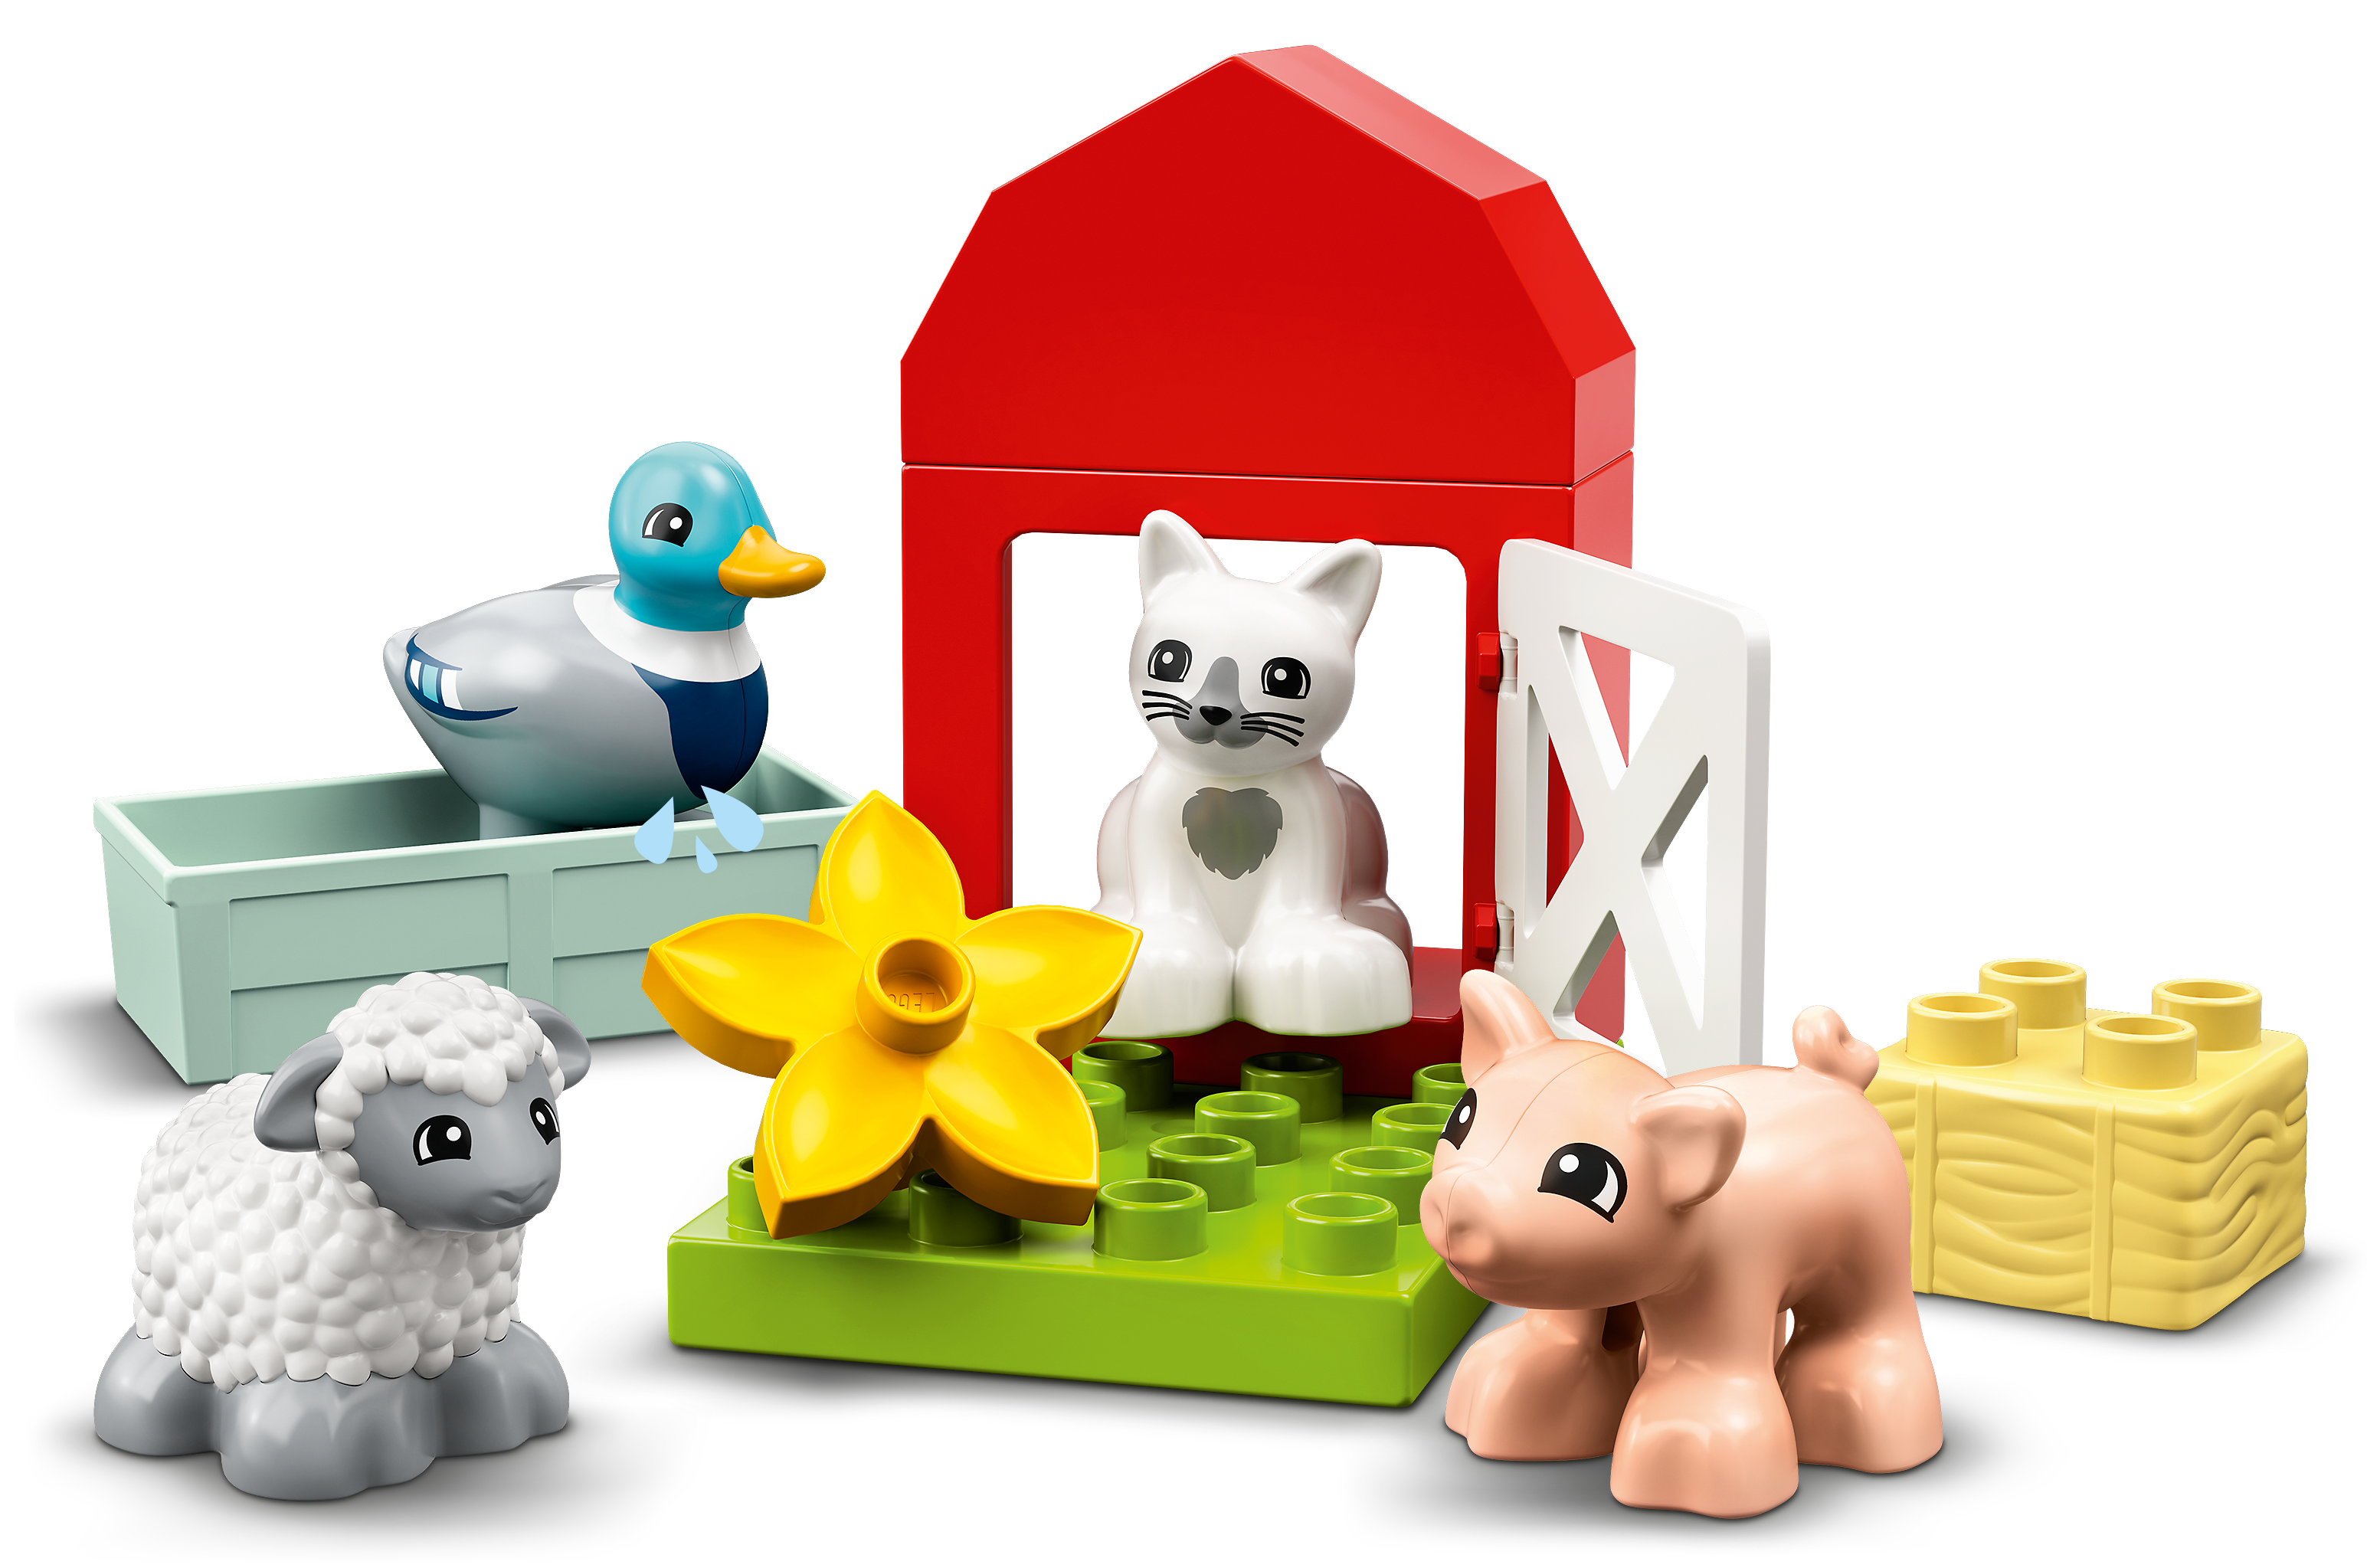 Farm Animal Toys and Figures  | Official LEGO® Shop US